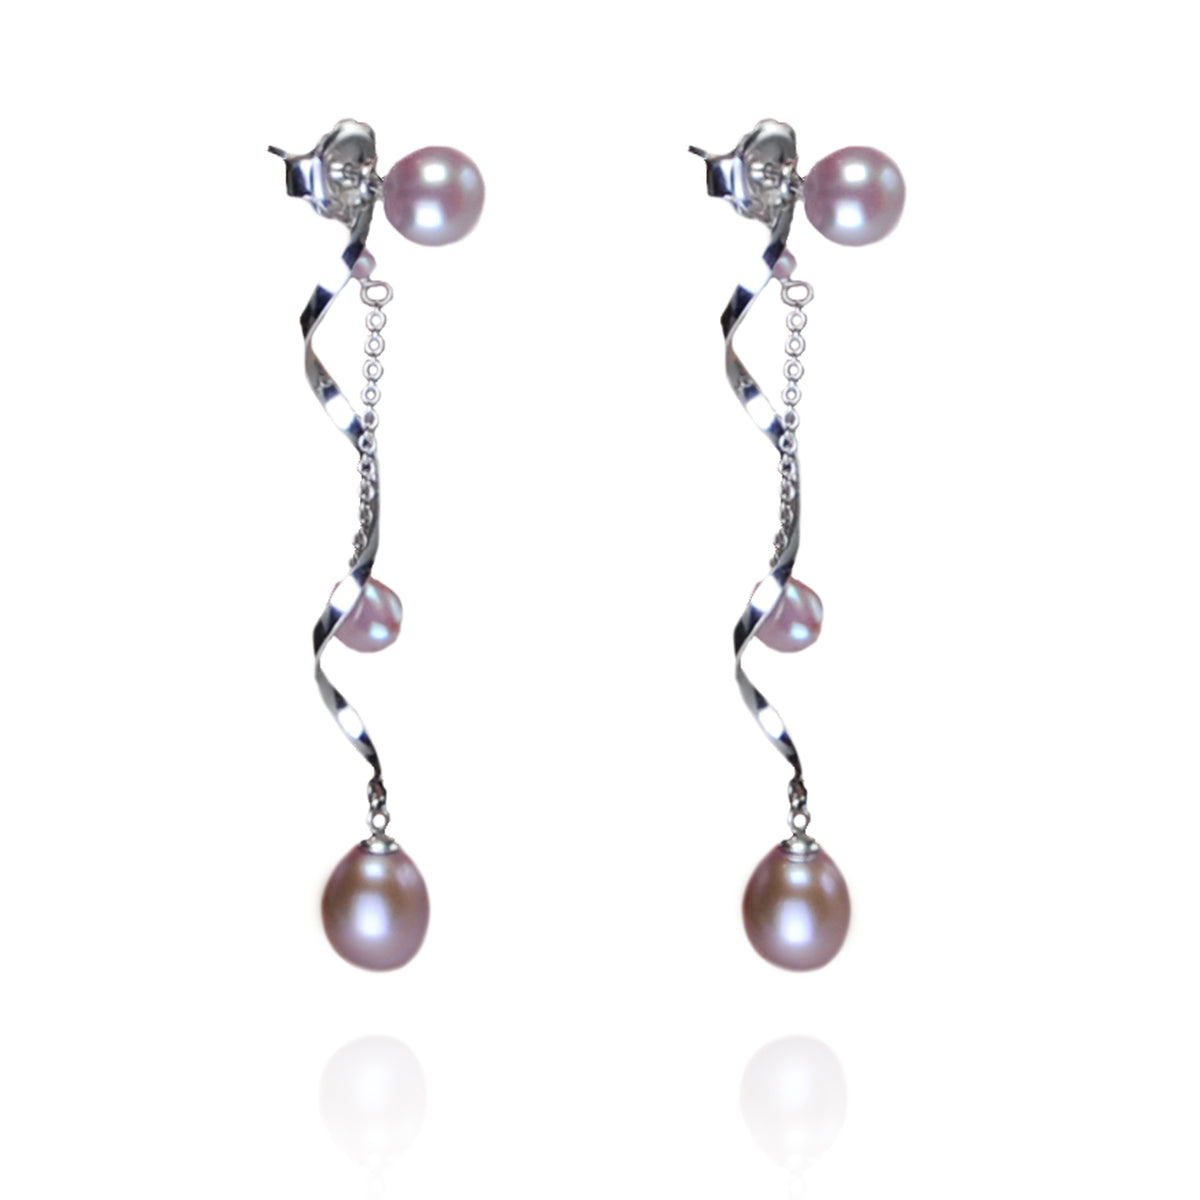 Freshwater Pearl earrings with optional long Silver Swirl &amp; Chain Pearl Drop in Pink